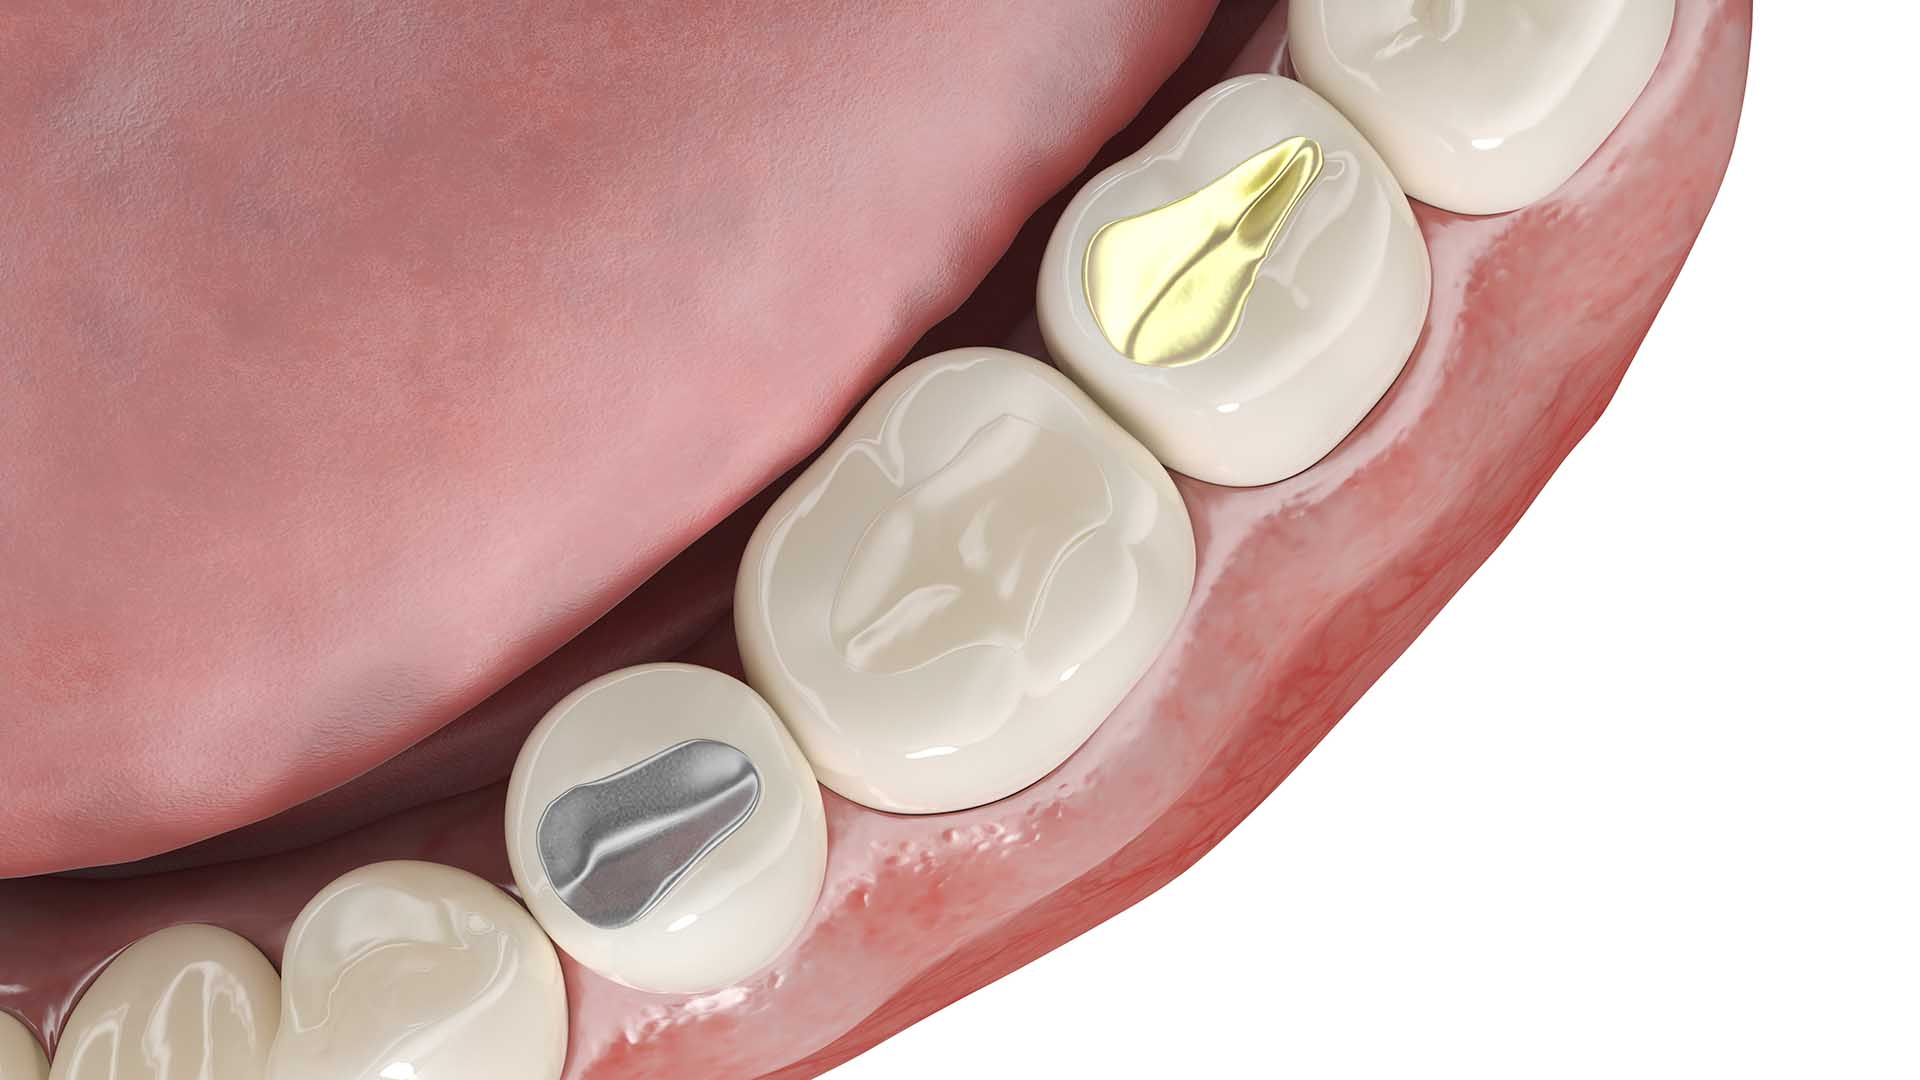 3d rendered illustration of different dental fillings. Ivy Lane Dentistry offers solutions for lost fillings requiring emergency dentistry care in San Antonio, TX.